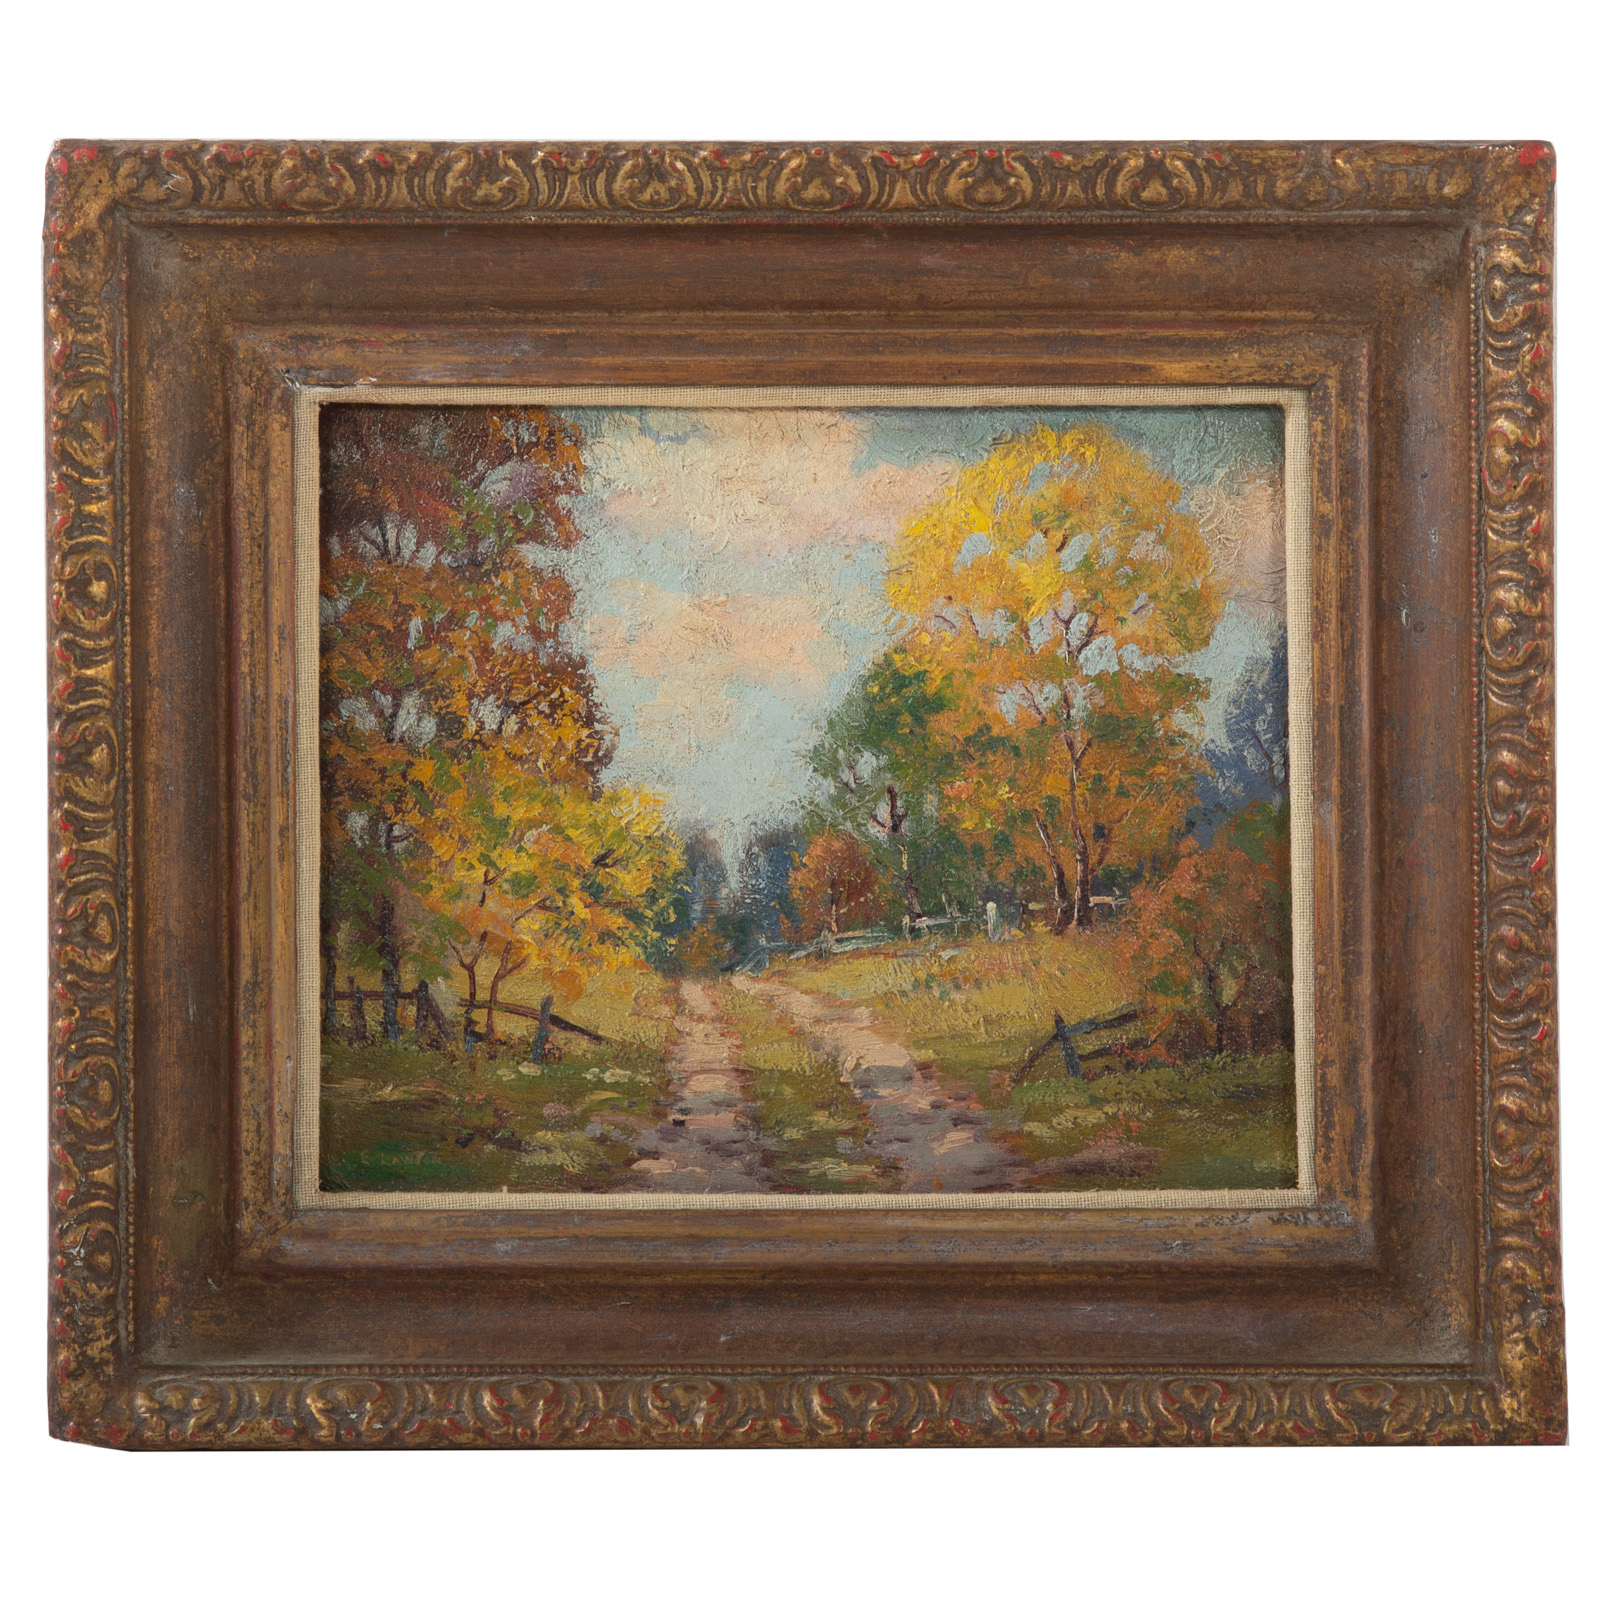 ATTRIBUTED TO ERNEST LAWSON. FALL